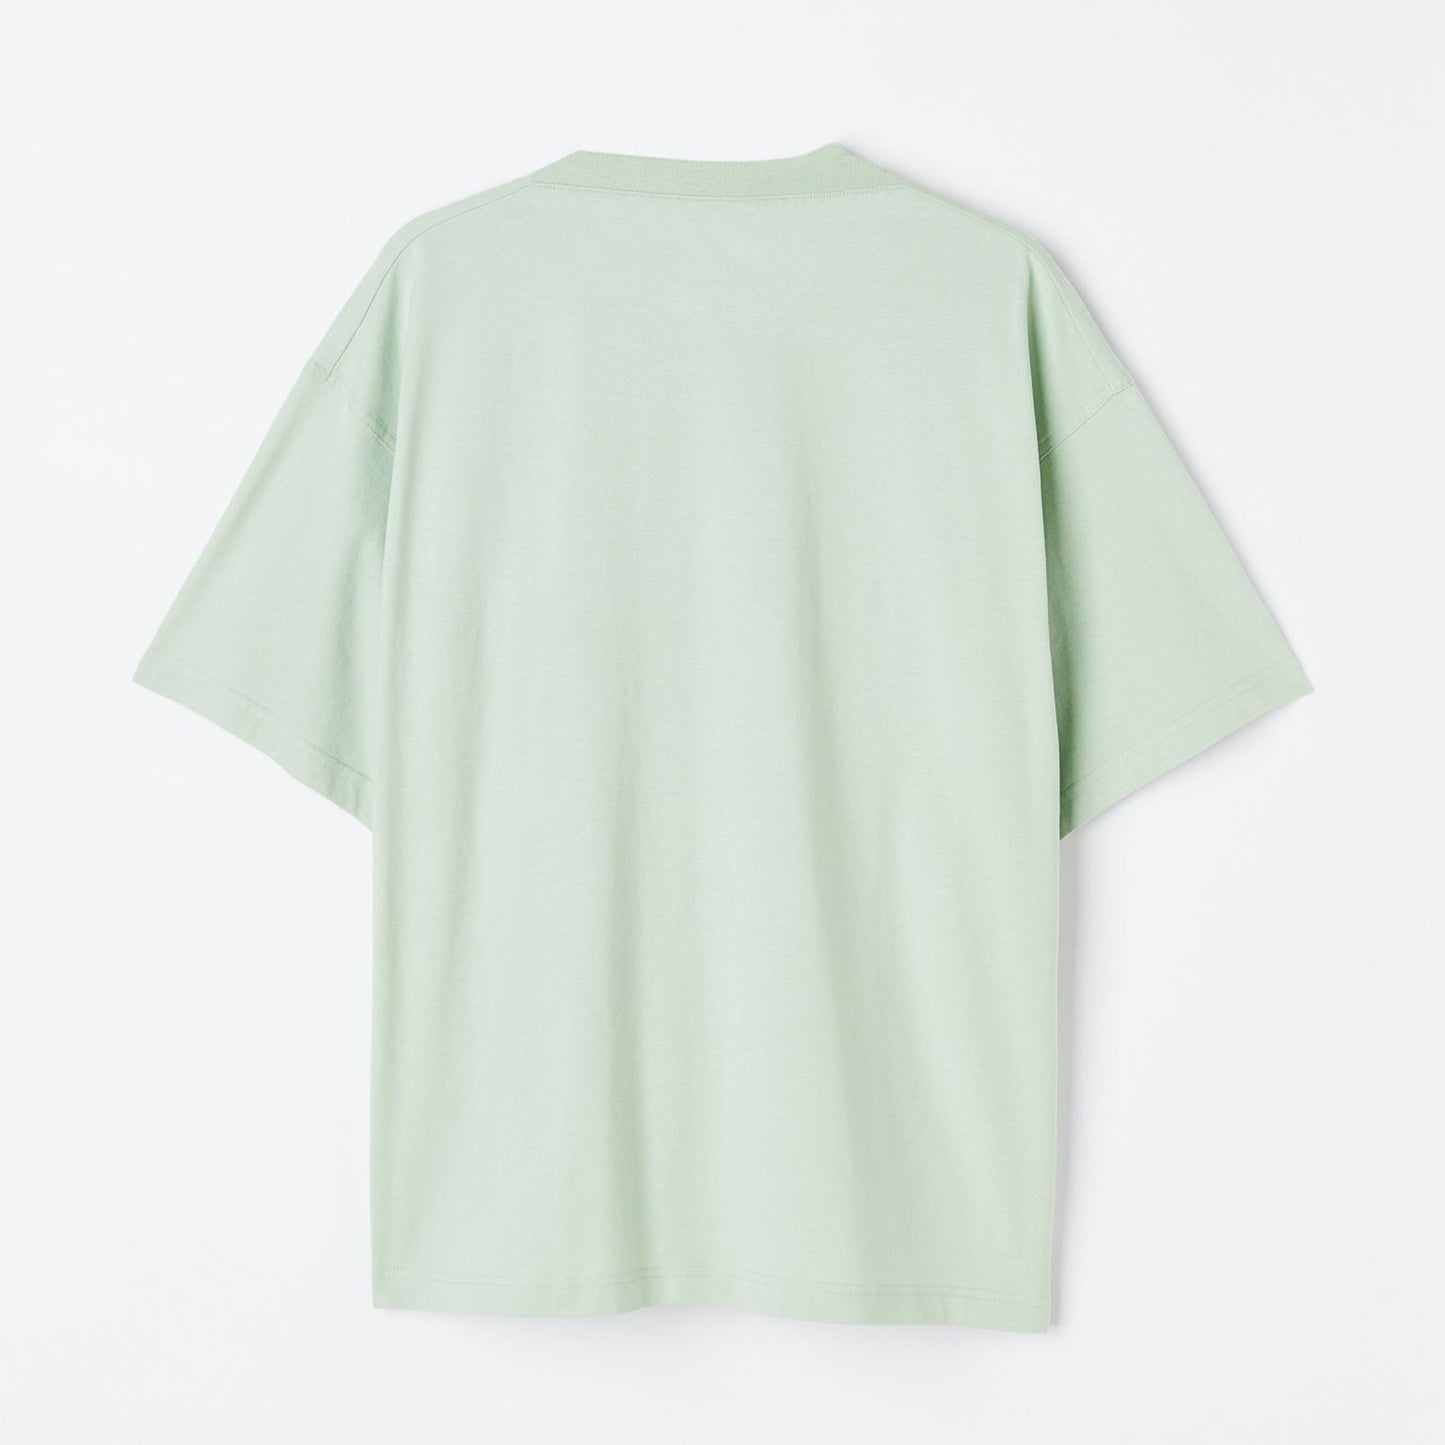 New-Port Beach Graphic Printed Oversized Mint Green Cotton T-shirt